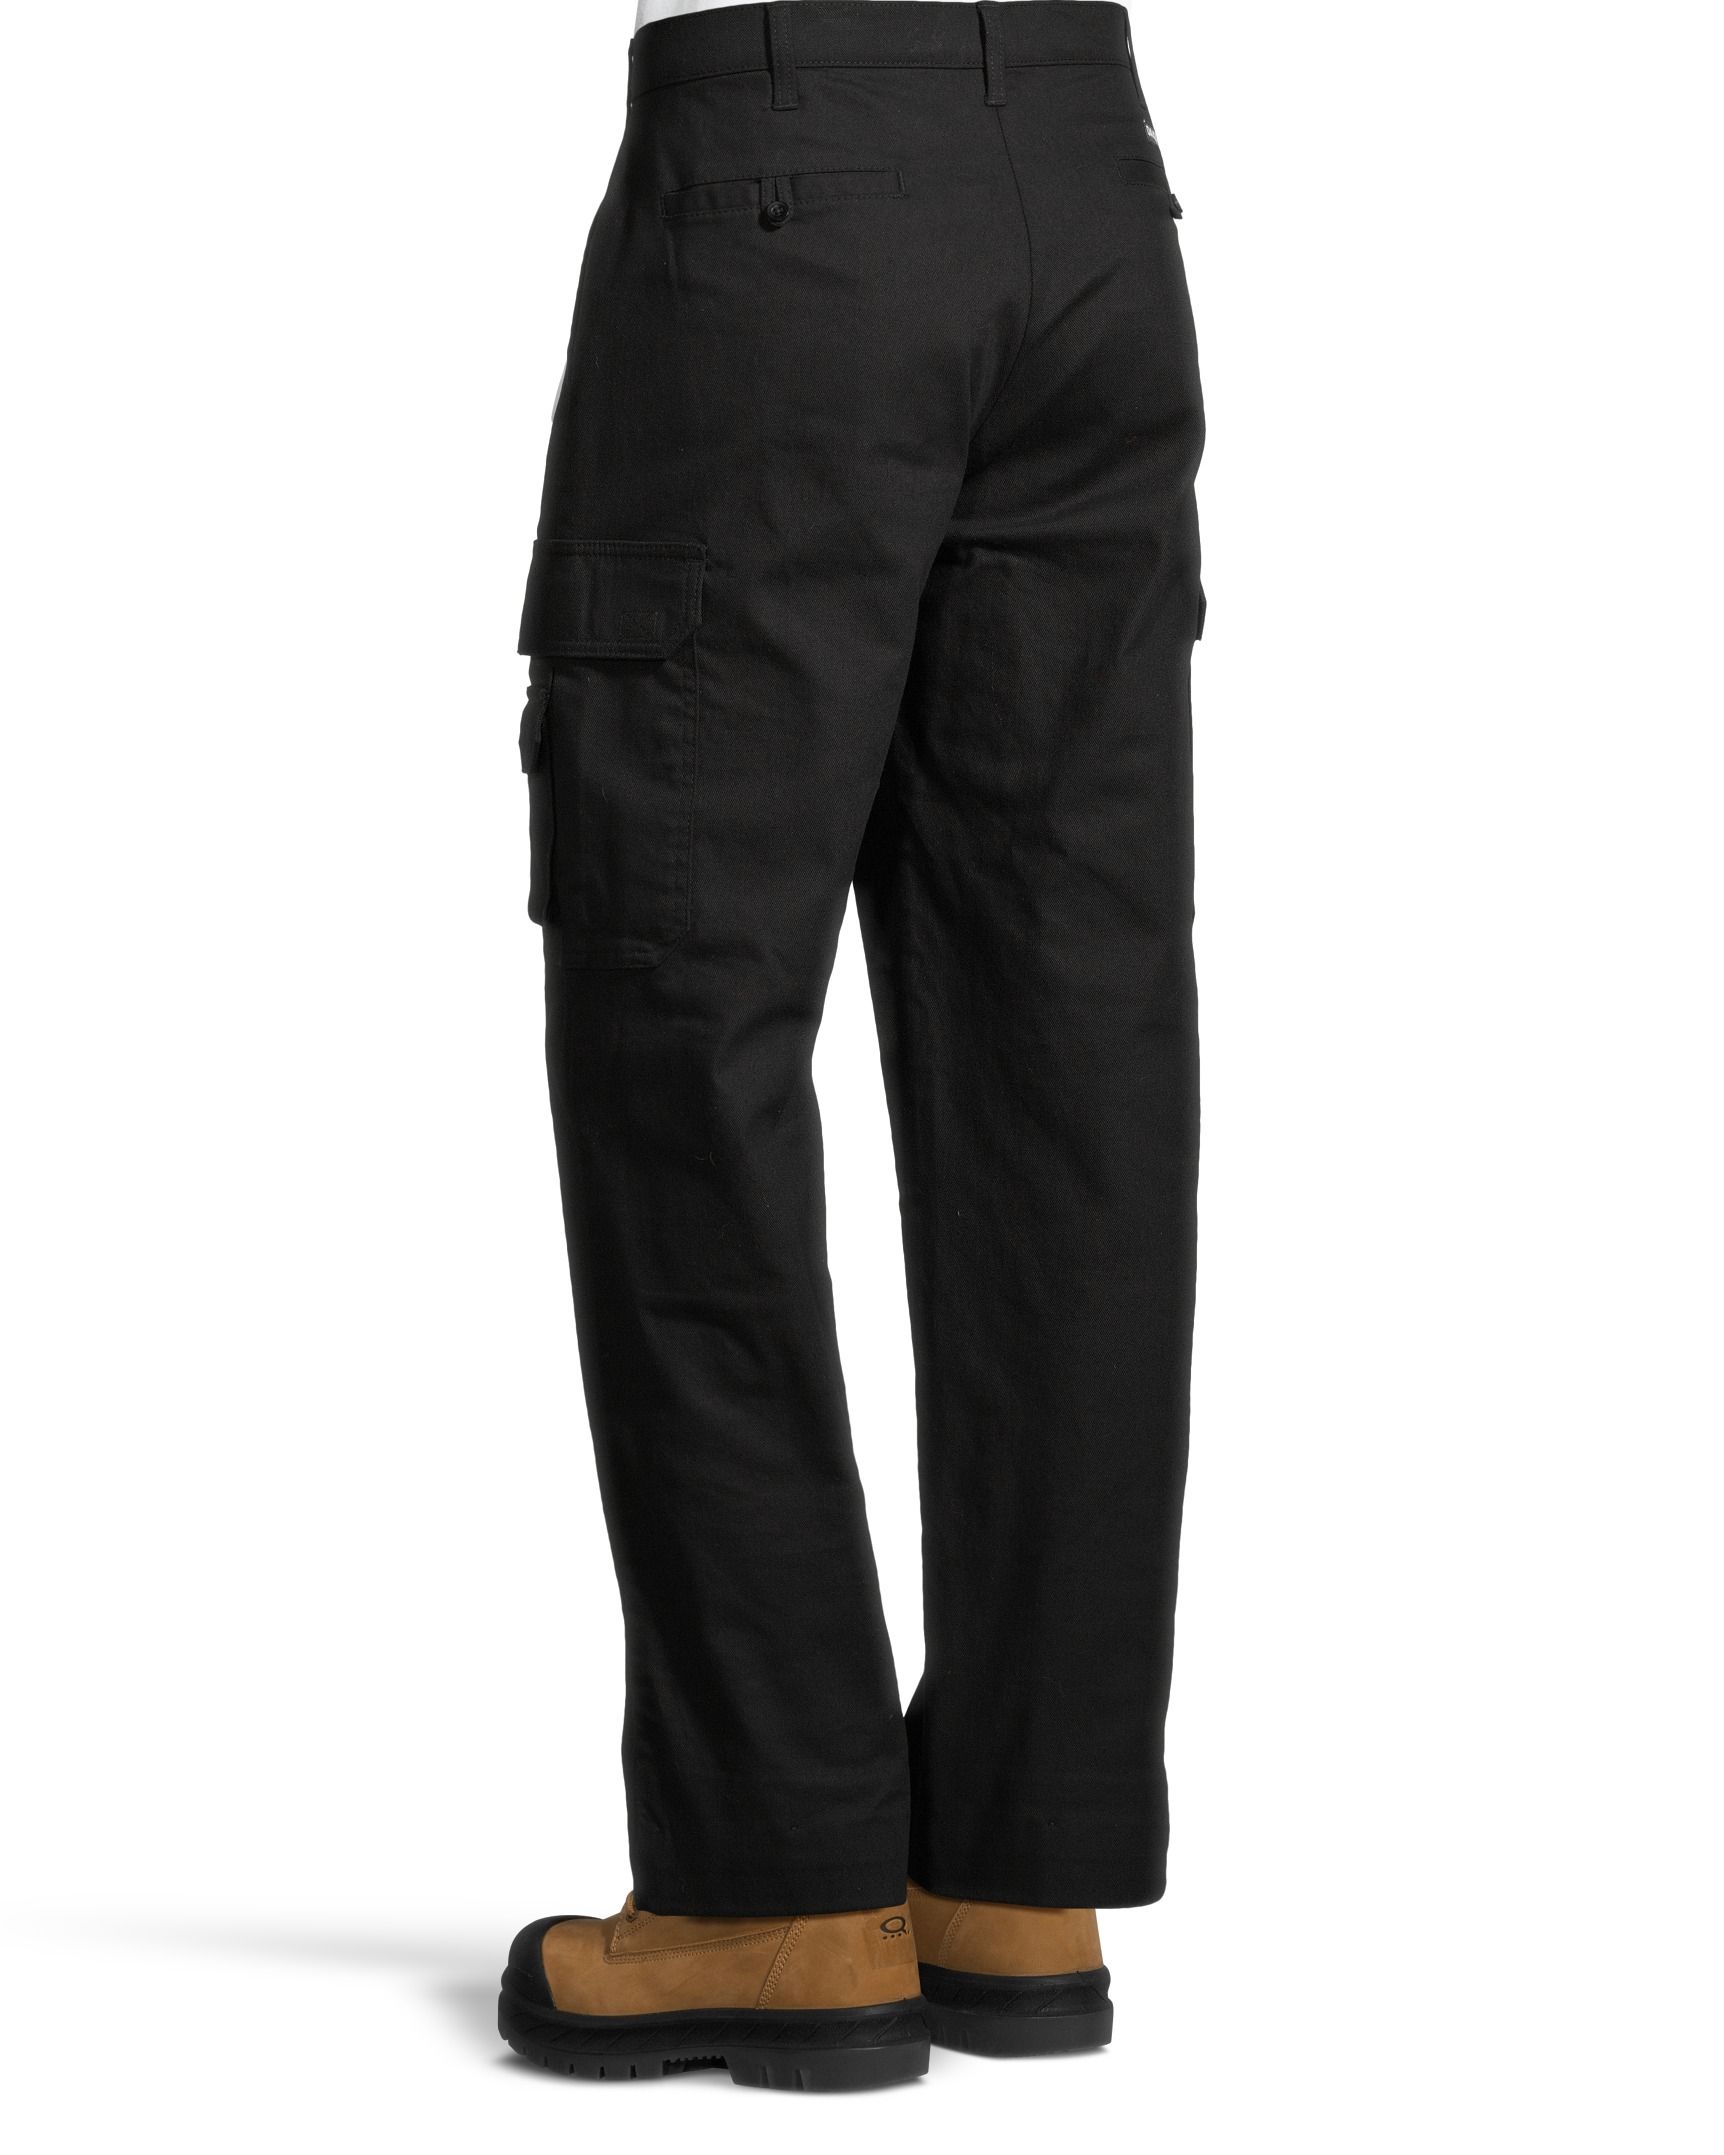 Snickers Trousers 6251 - Allround Work Stretch Loose Fit Trousers - Steel  Grey - Builders Superstore